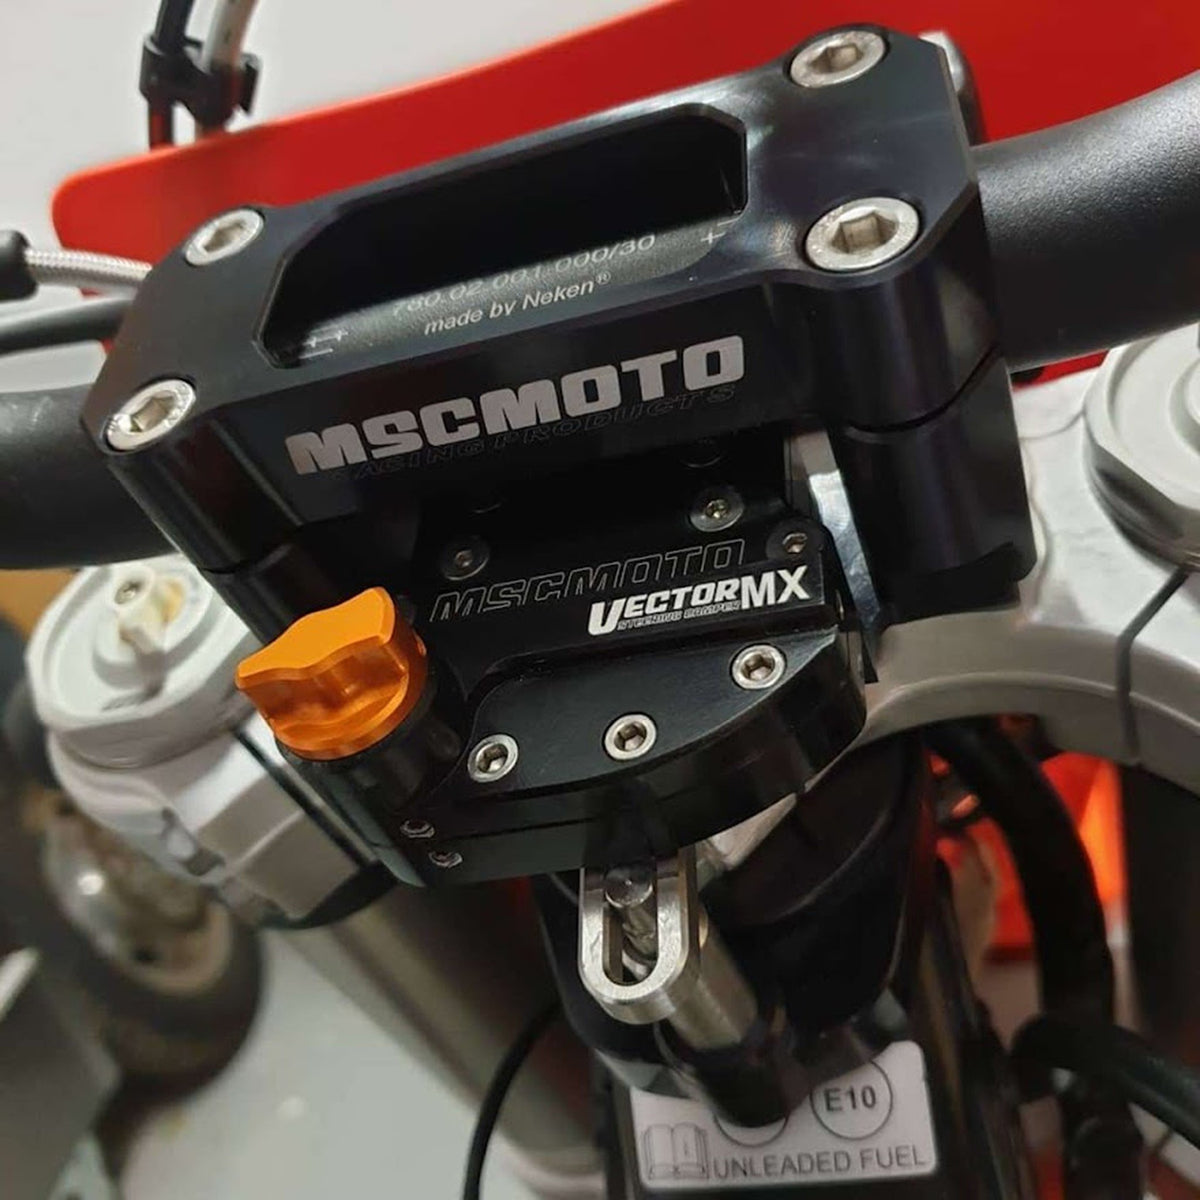 VectorMX Steering Damper Kit &quot;Down Under&quot; Mount (VEC0003) - HONDA	CRF, VEC0003, Honda MSC Moto, vectormx, Steering Dampers - Imported and distributed in North &amp; South America by Lindeco Genuine Powersports - Premier Powersports Equipment and Accessories for Motorcycle Enthusiasts, Professional Riders and Dealers.